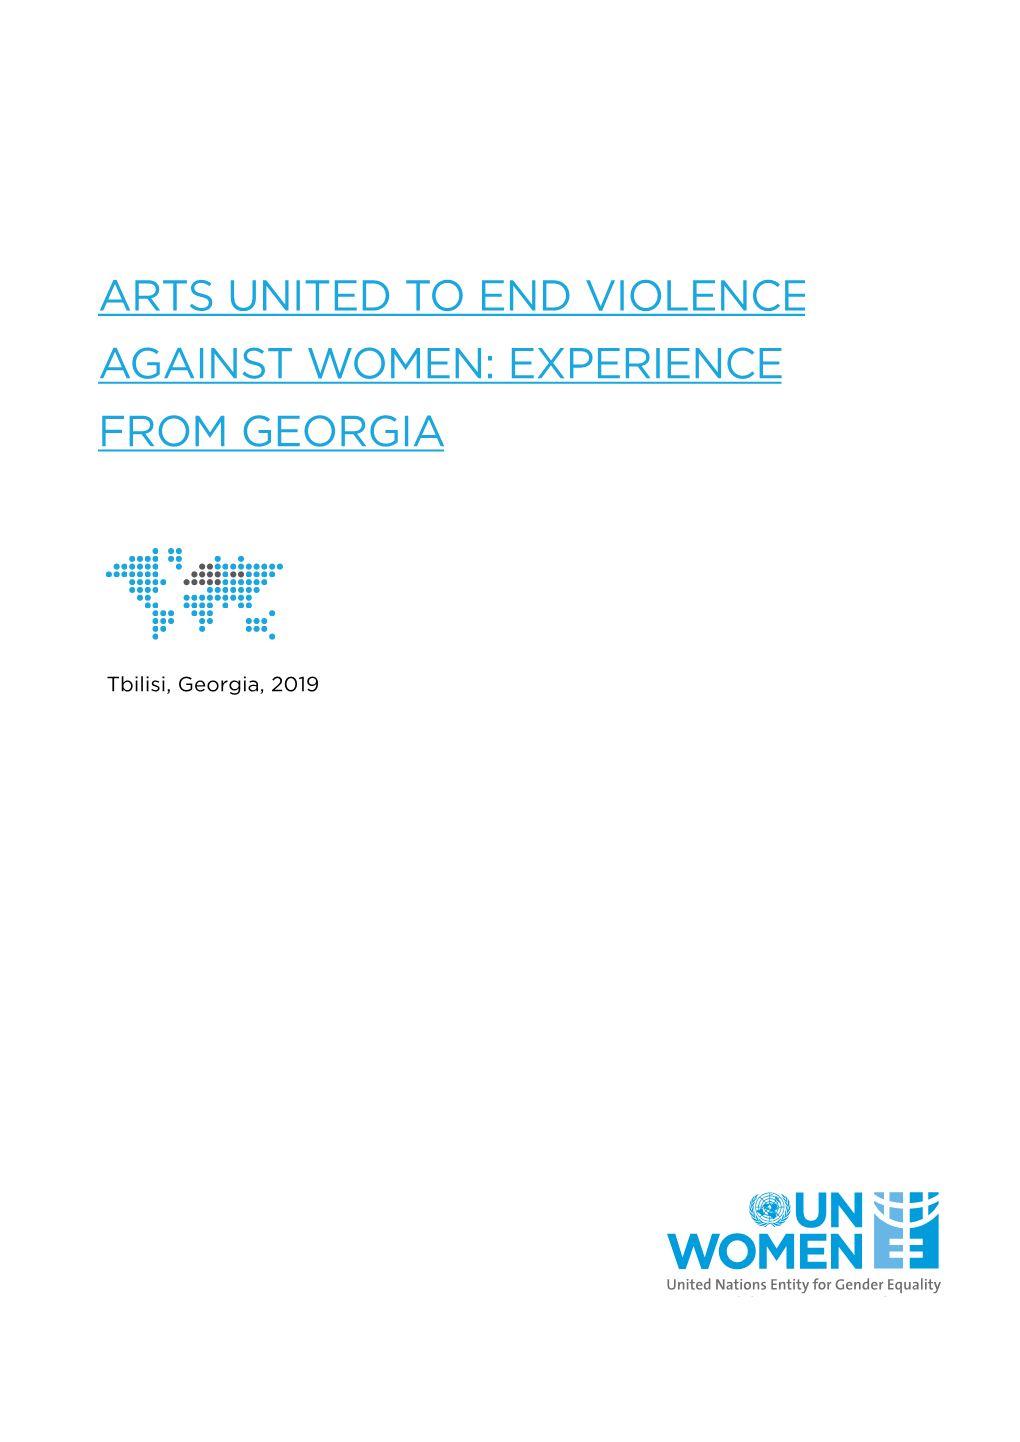 Arts United to End Violence Against Women: Experience from Georgia